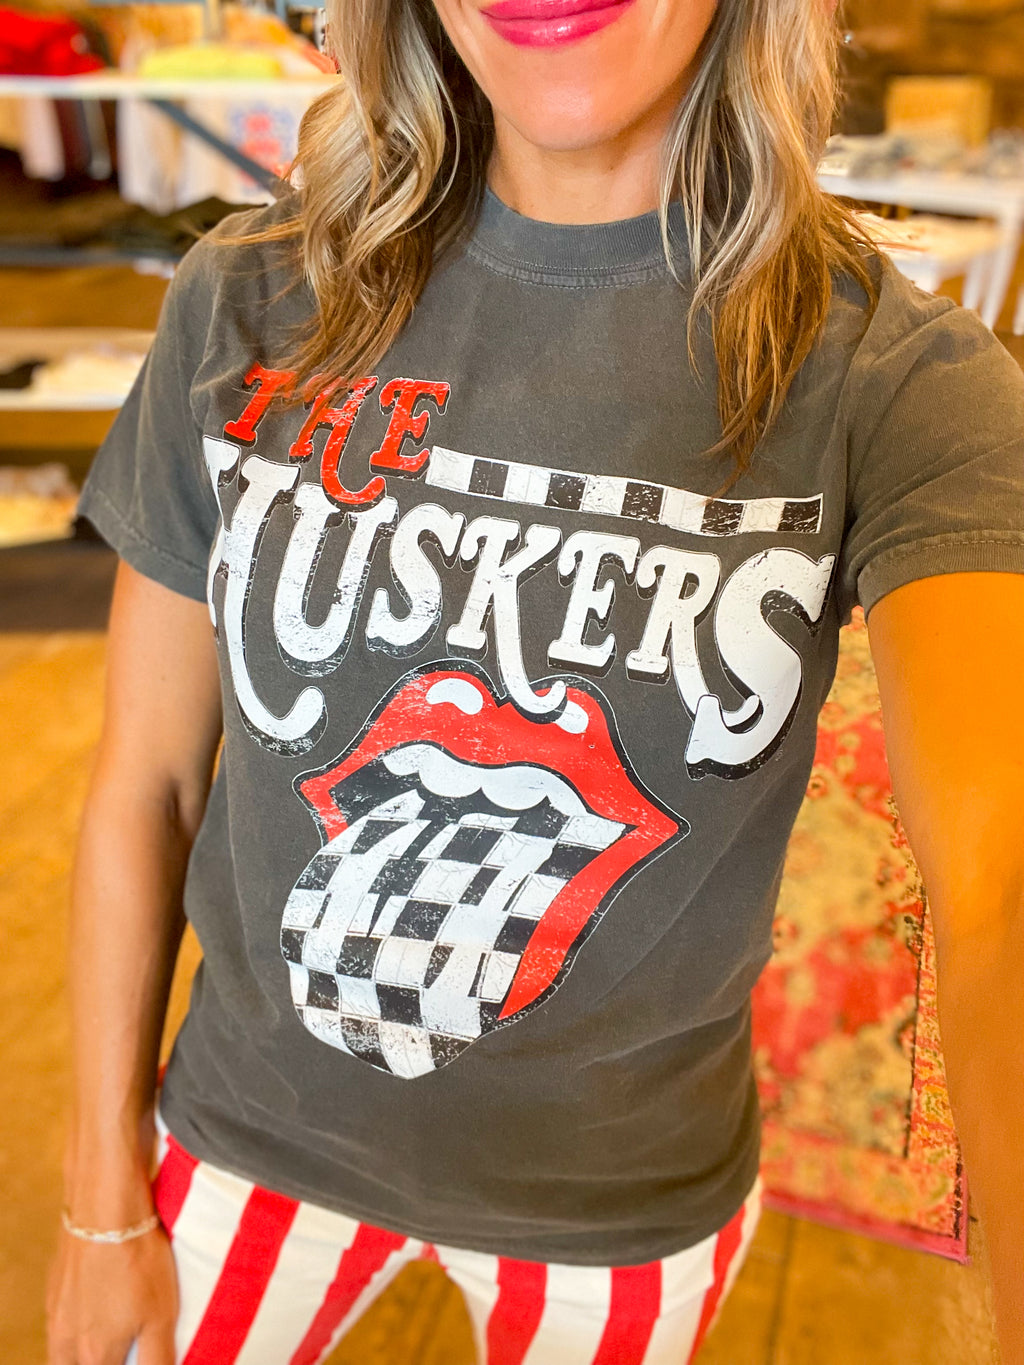 The Huskers Rolling Stones Tee